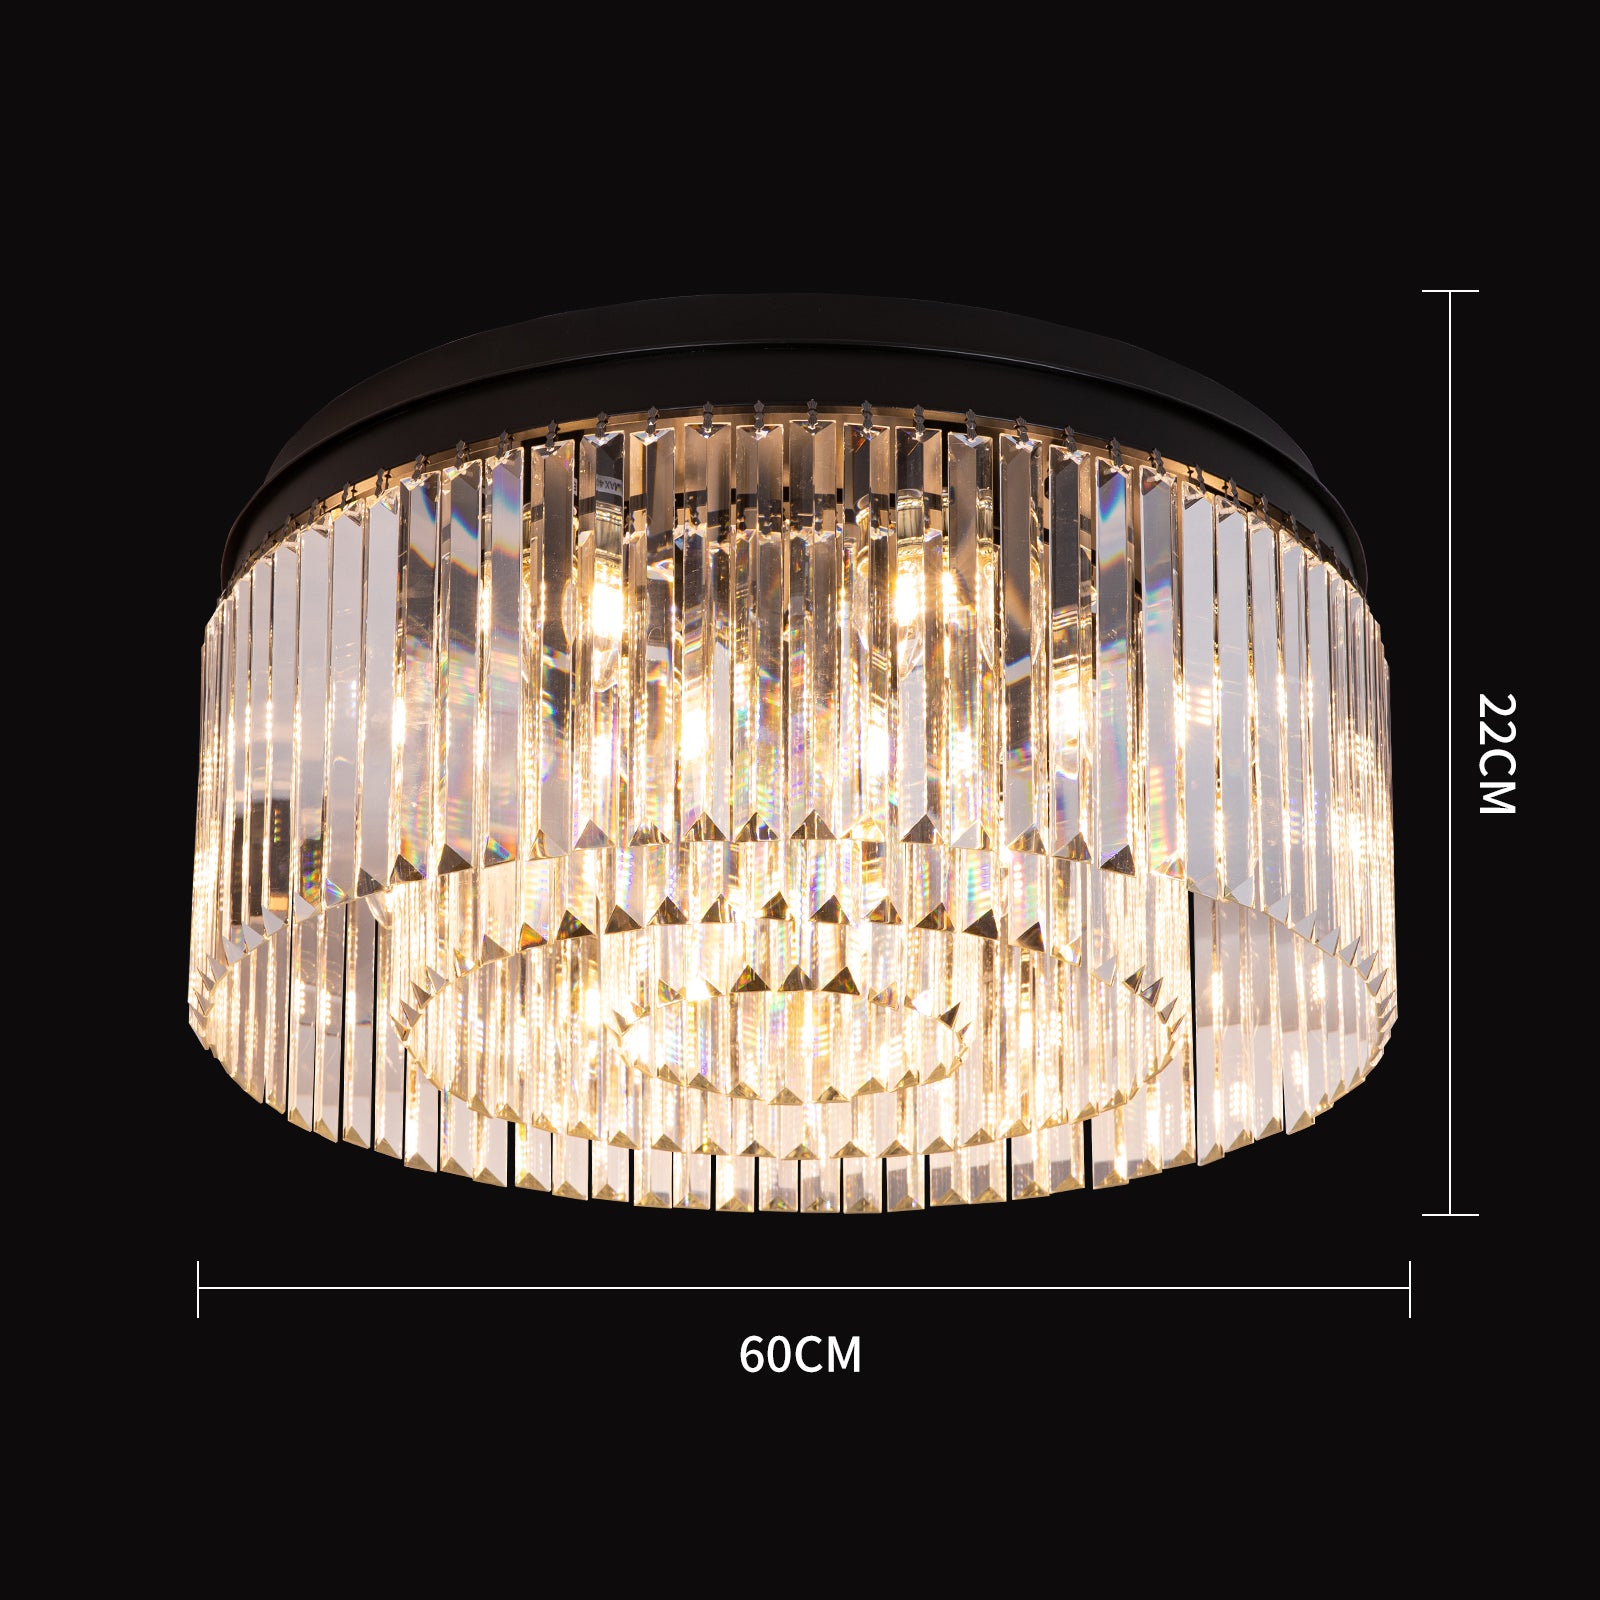 Luxware Polaris 1-Tier Chandelier with Clear K9 Crystal Prism in Black Fixture - 60 cm